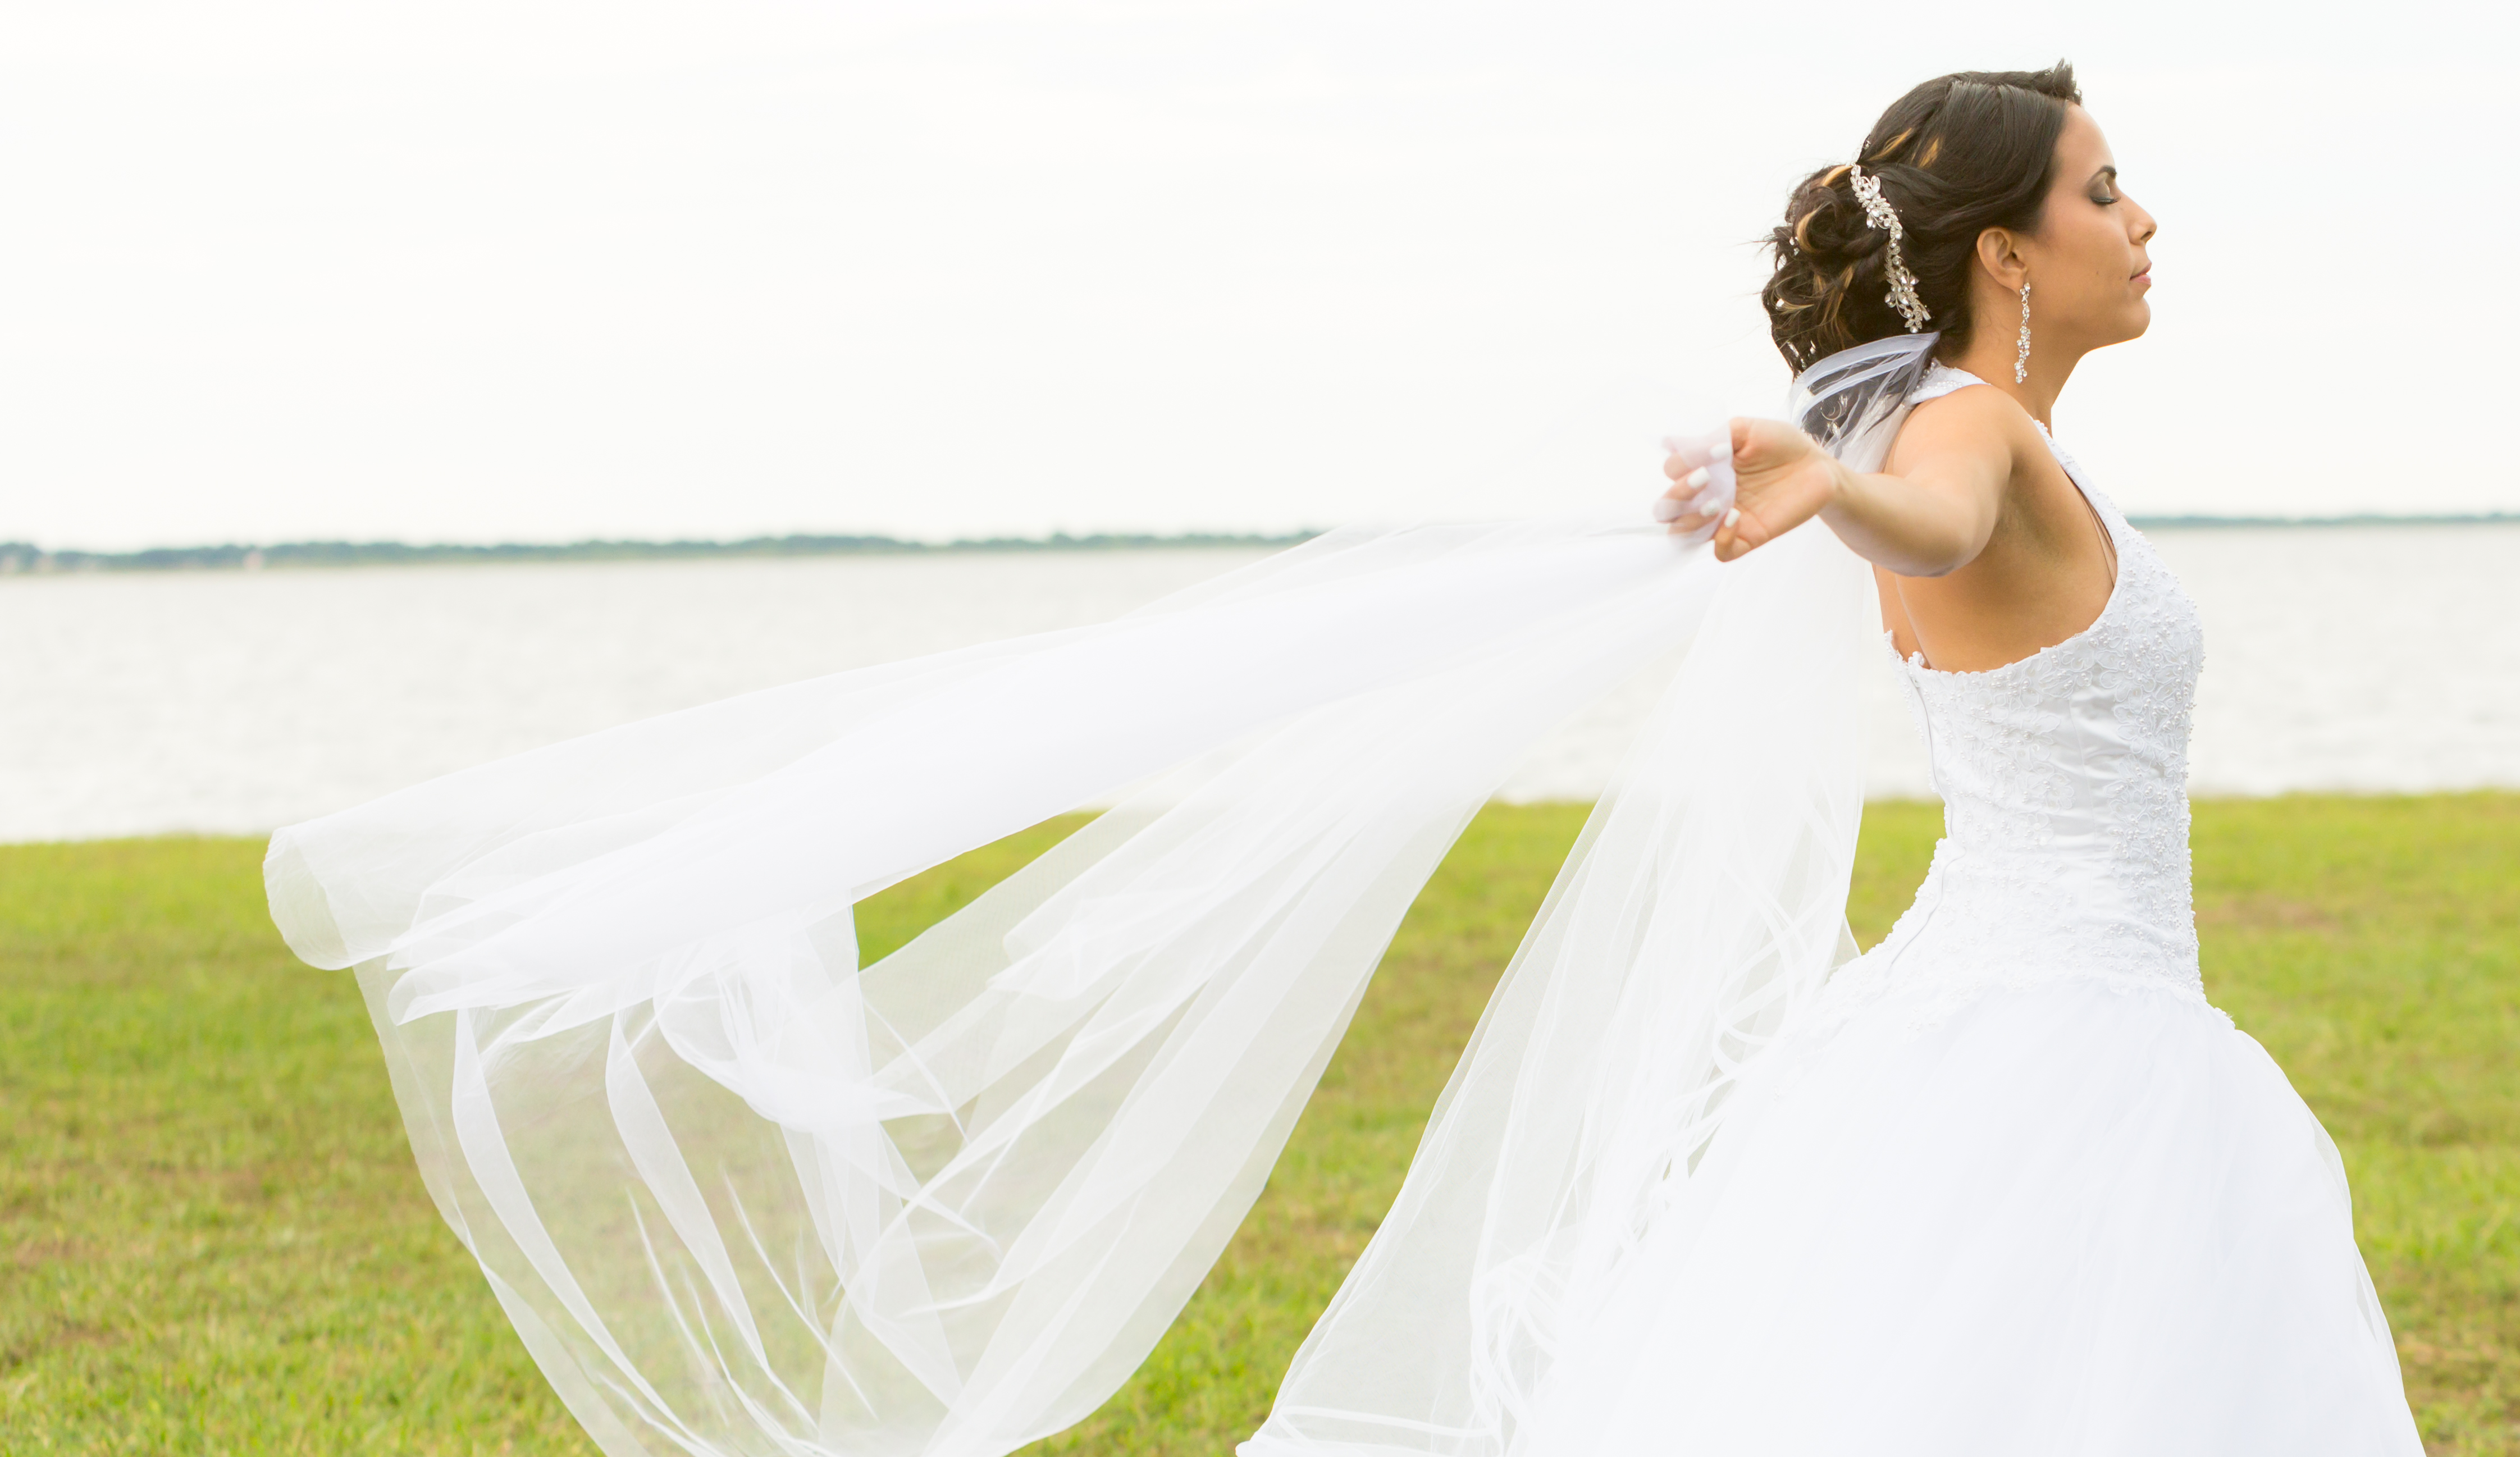 Couture Bridal Photography is the preferred artistic Orlando Florida Wedding photography professional for all Orlando and Disney Resorts